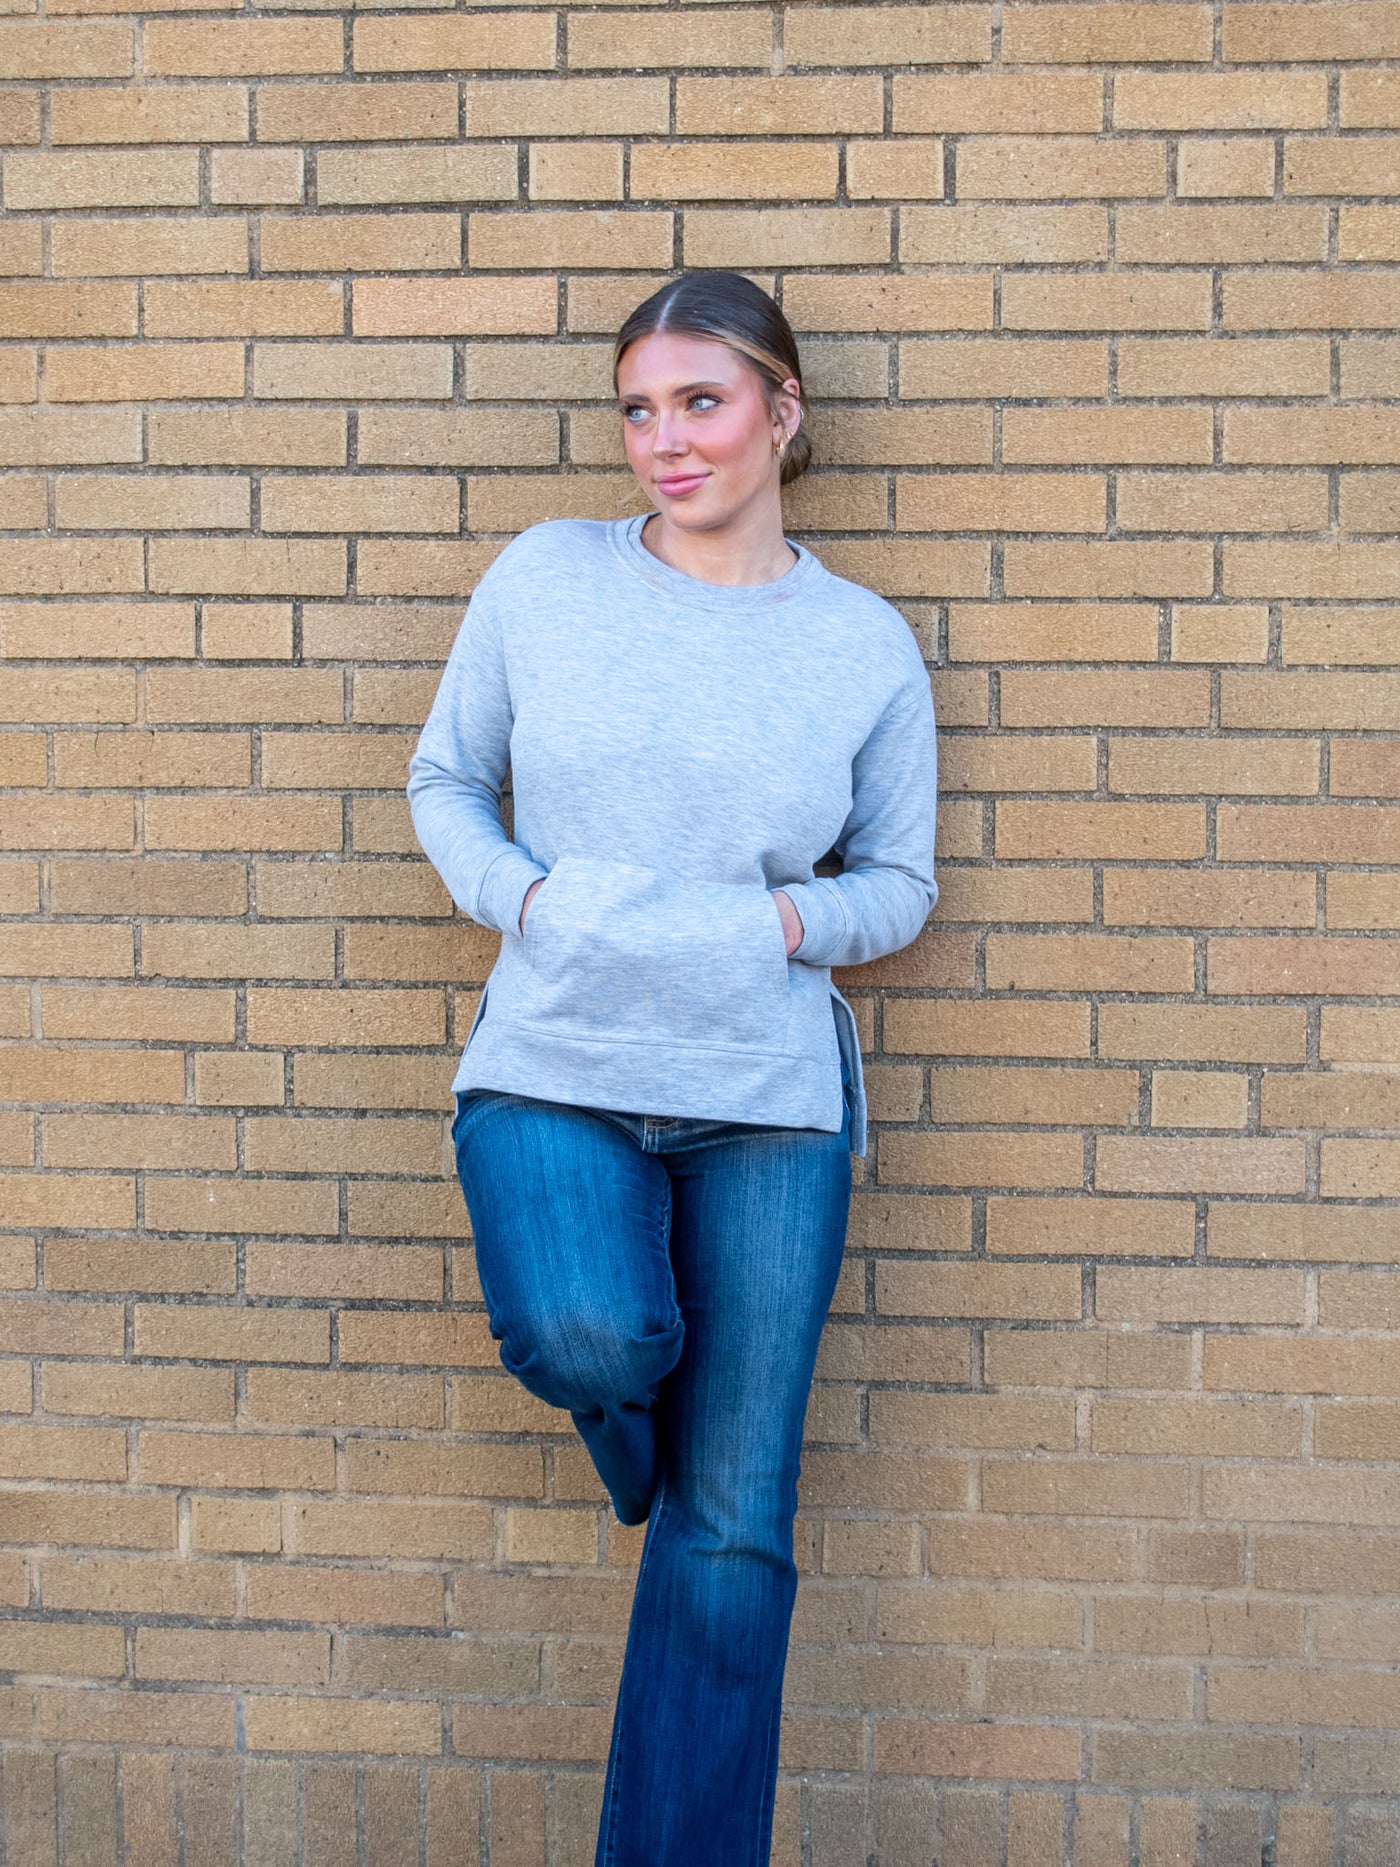 A model wearing a light gray crewneck sweatshirt with a front pocket and side slits. The model has it paired with a dark wash jean.